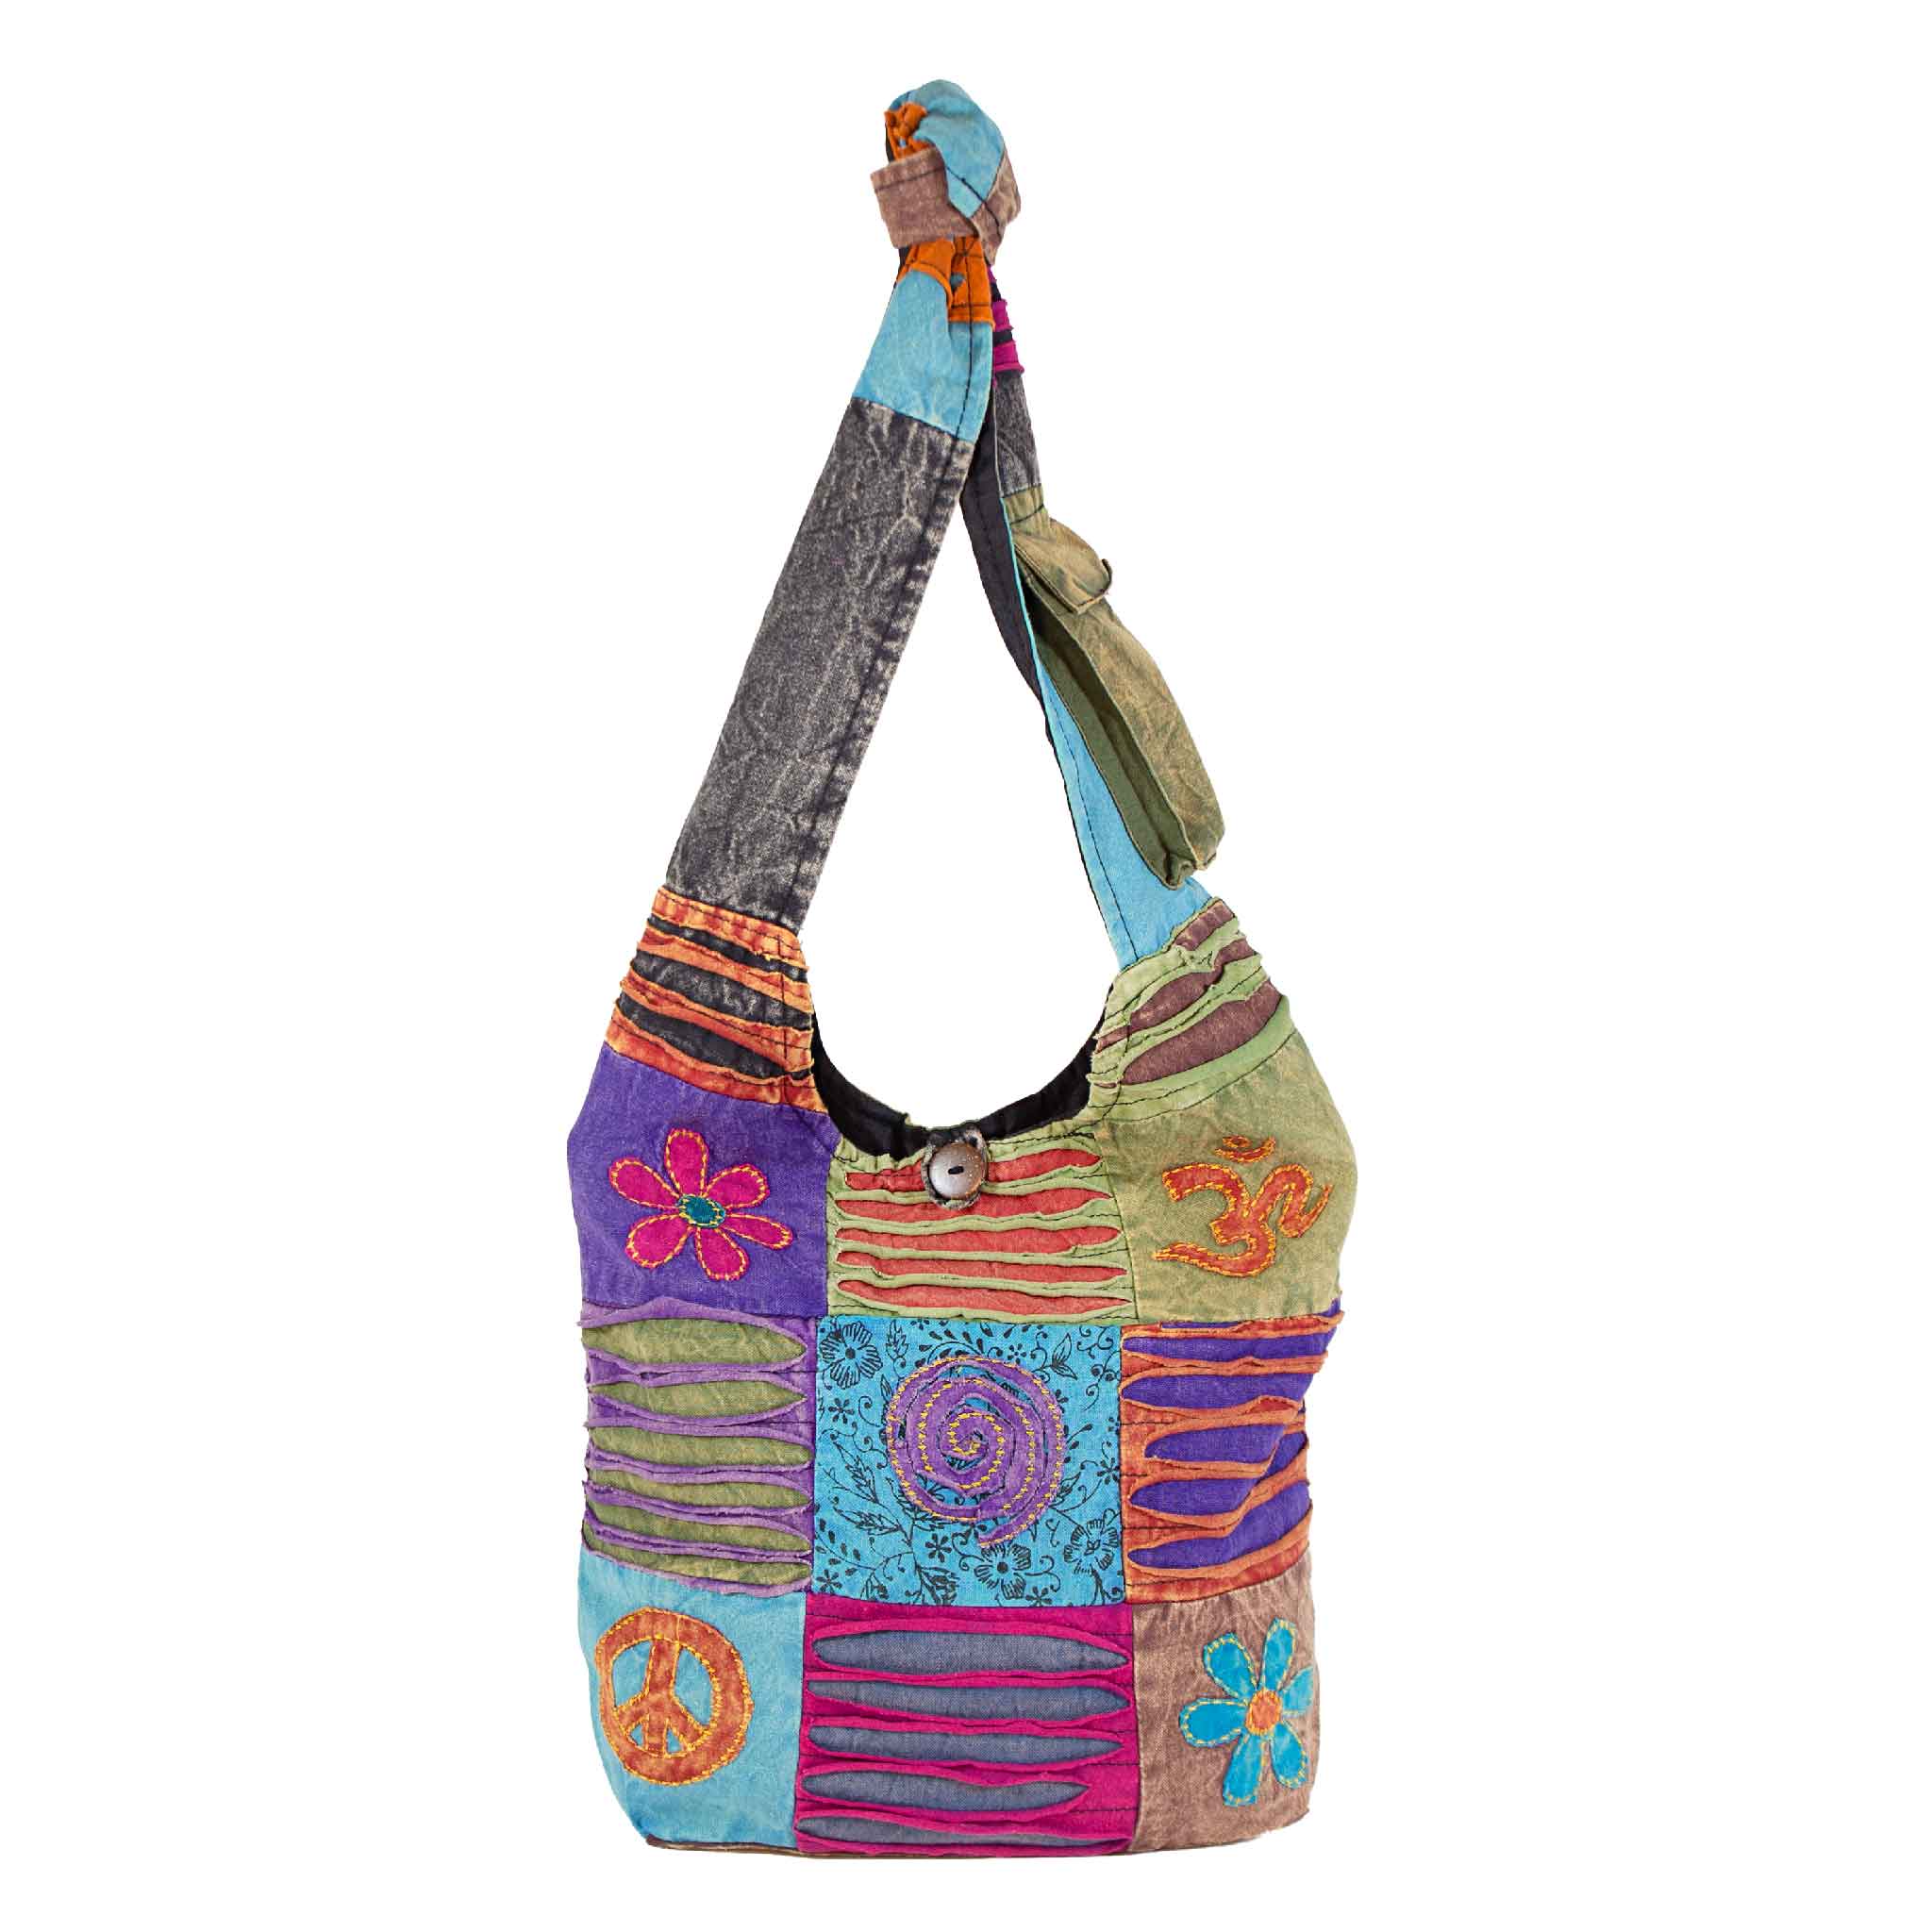 Export Quality Traditional Jhola Bag at Rs 300 | Women Purse in Jaipur |  ID: 4109624697